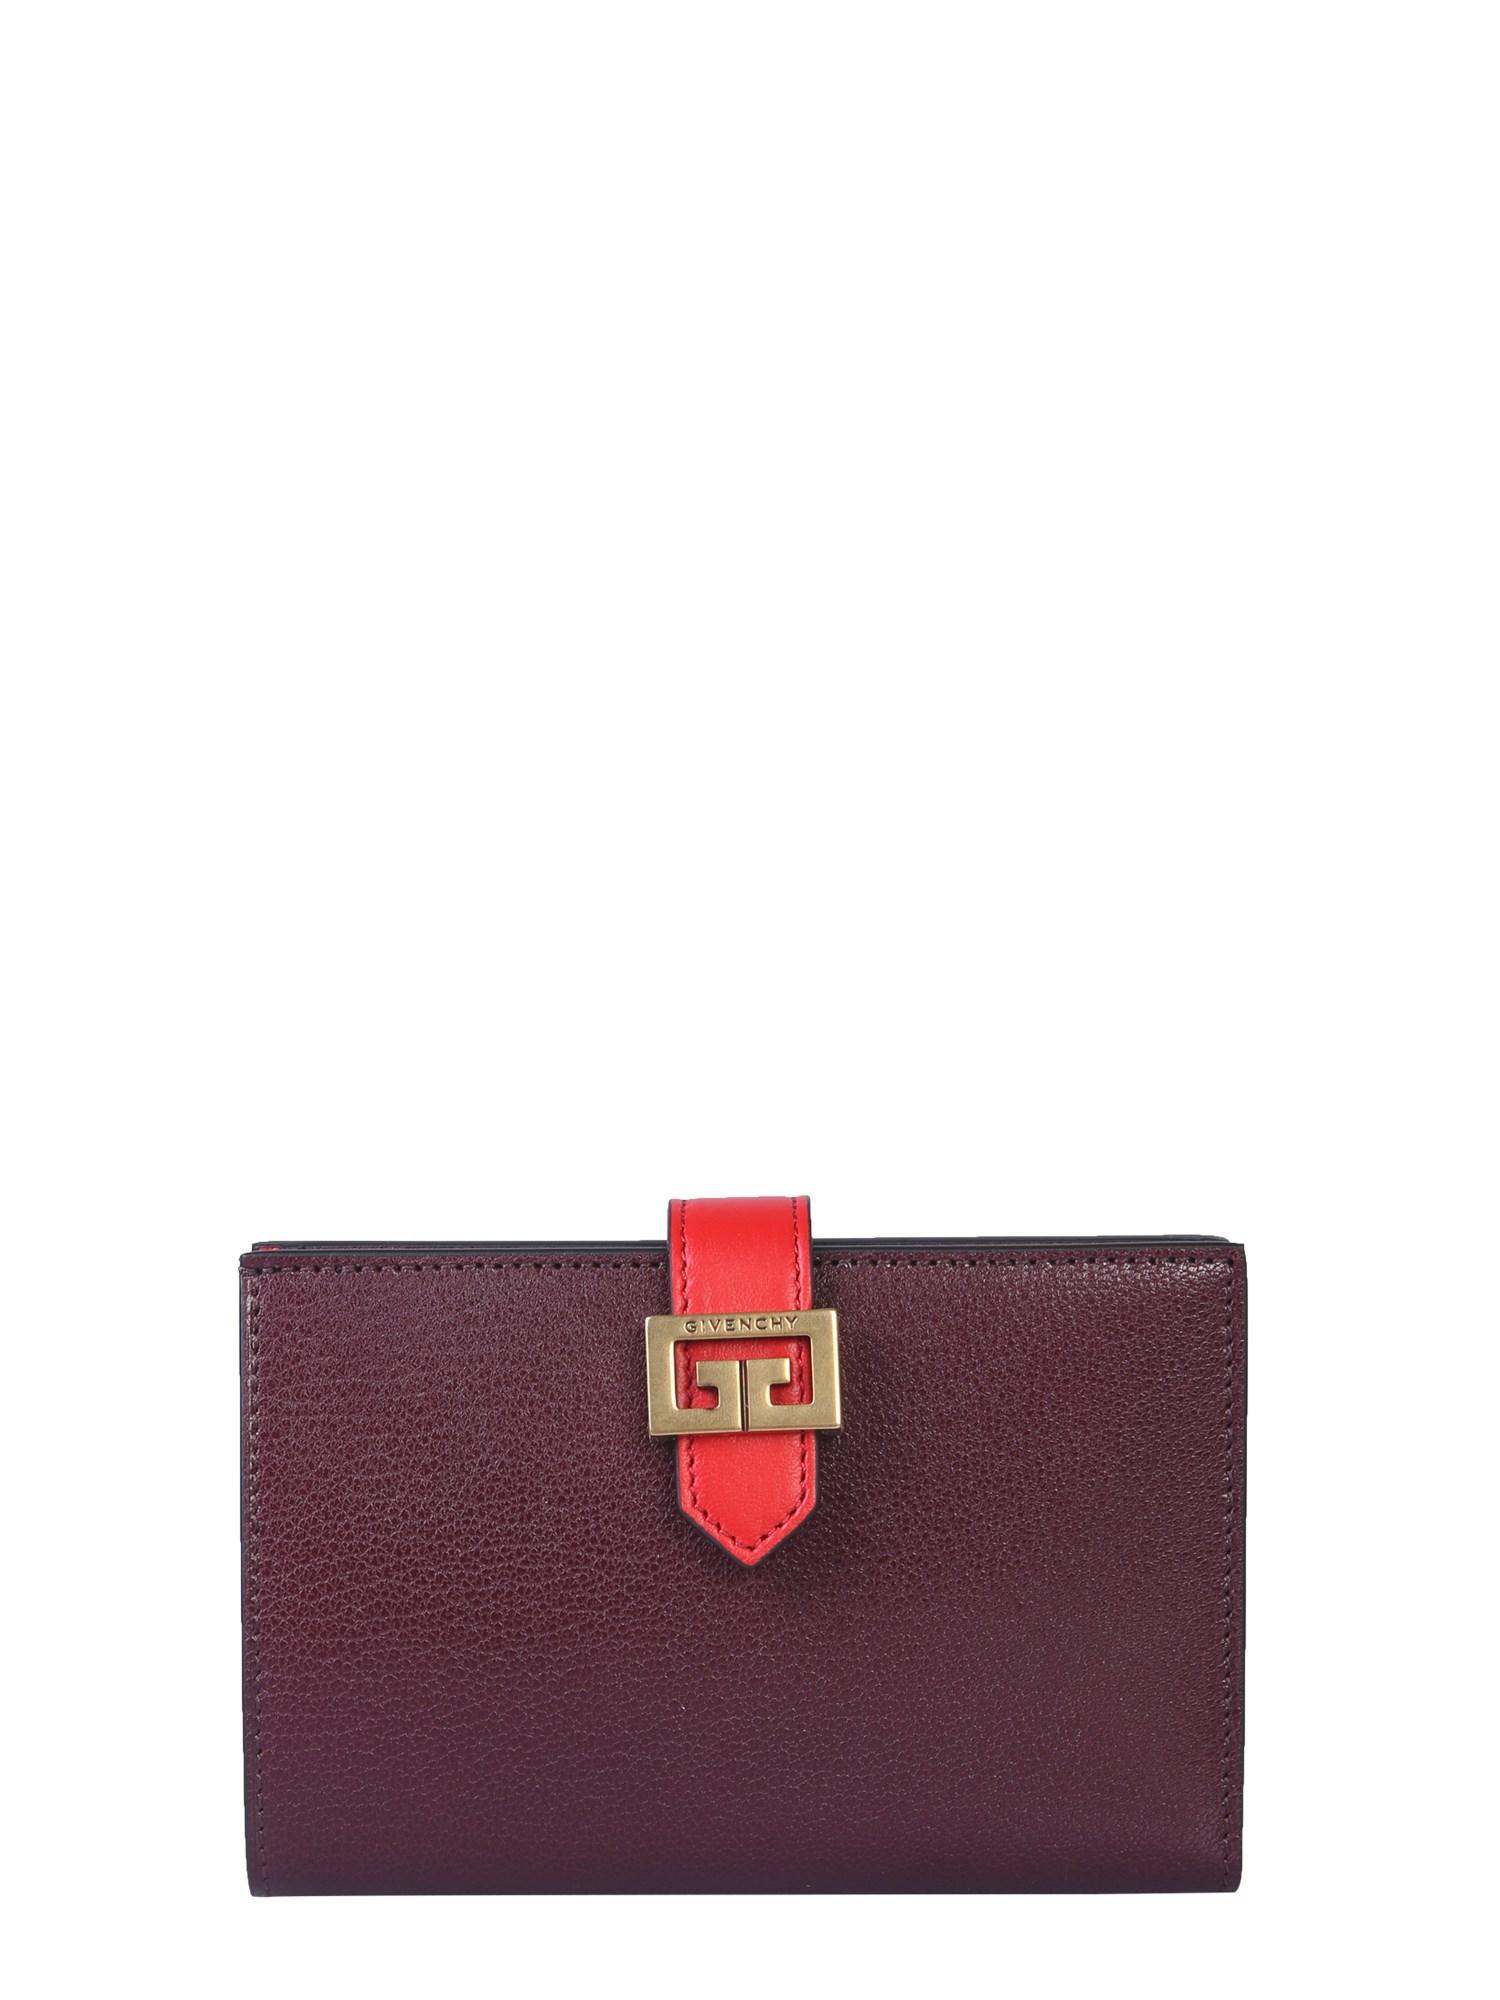 Givenchy Cv3 Leather Wallet in Bordeaux 